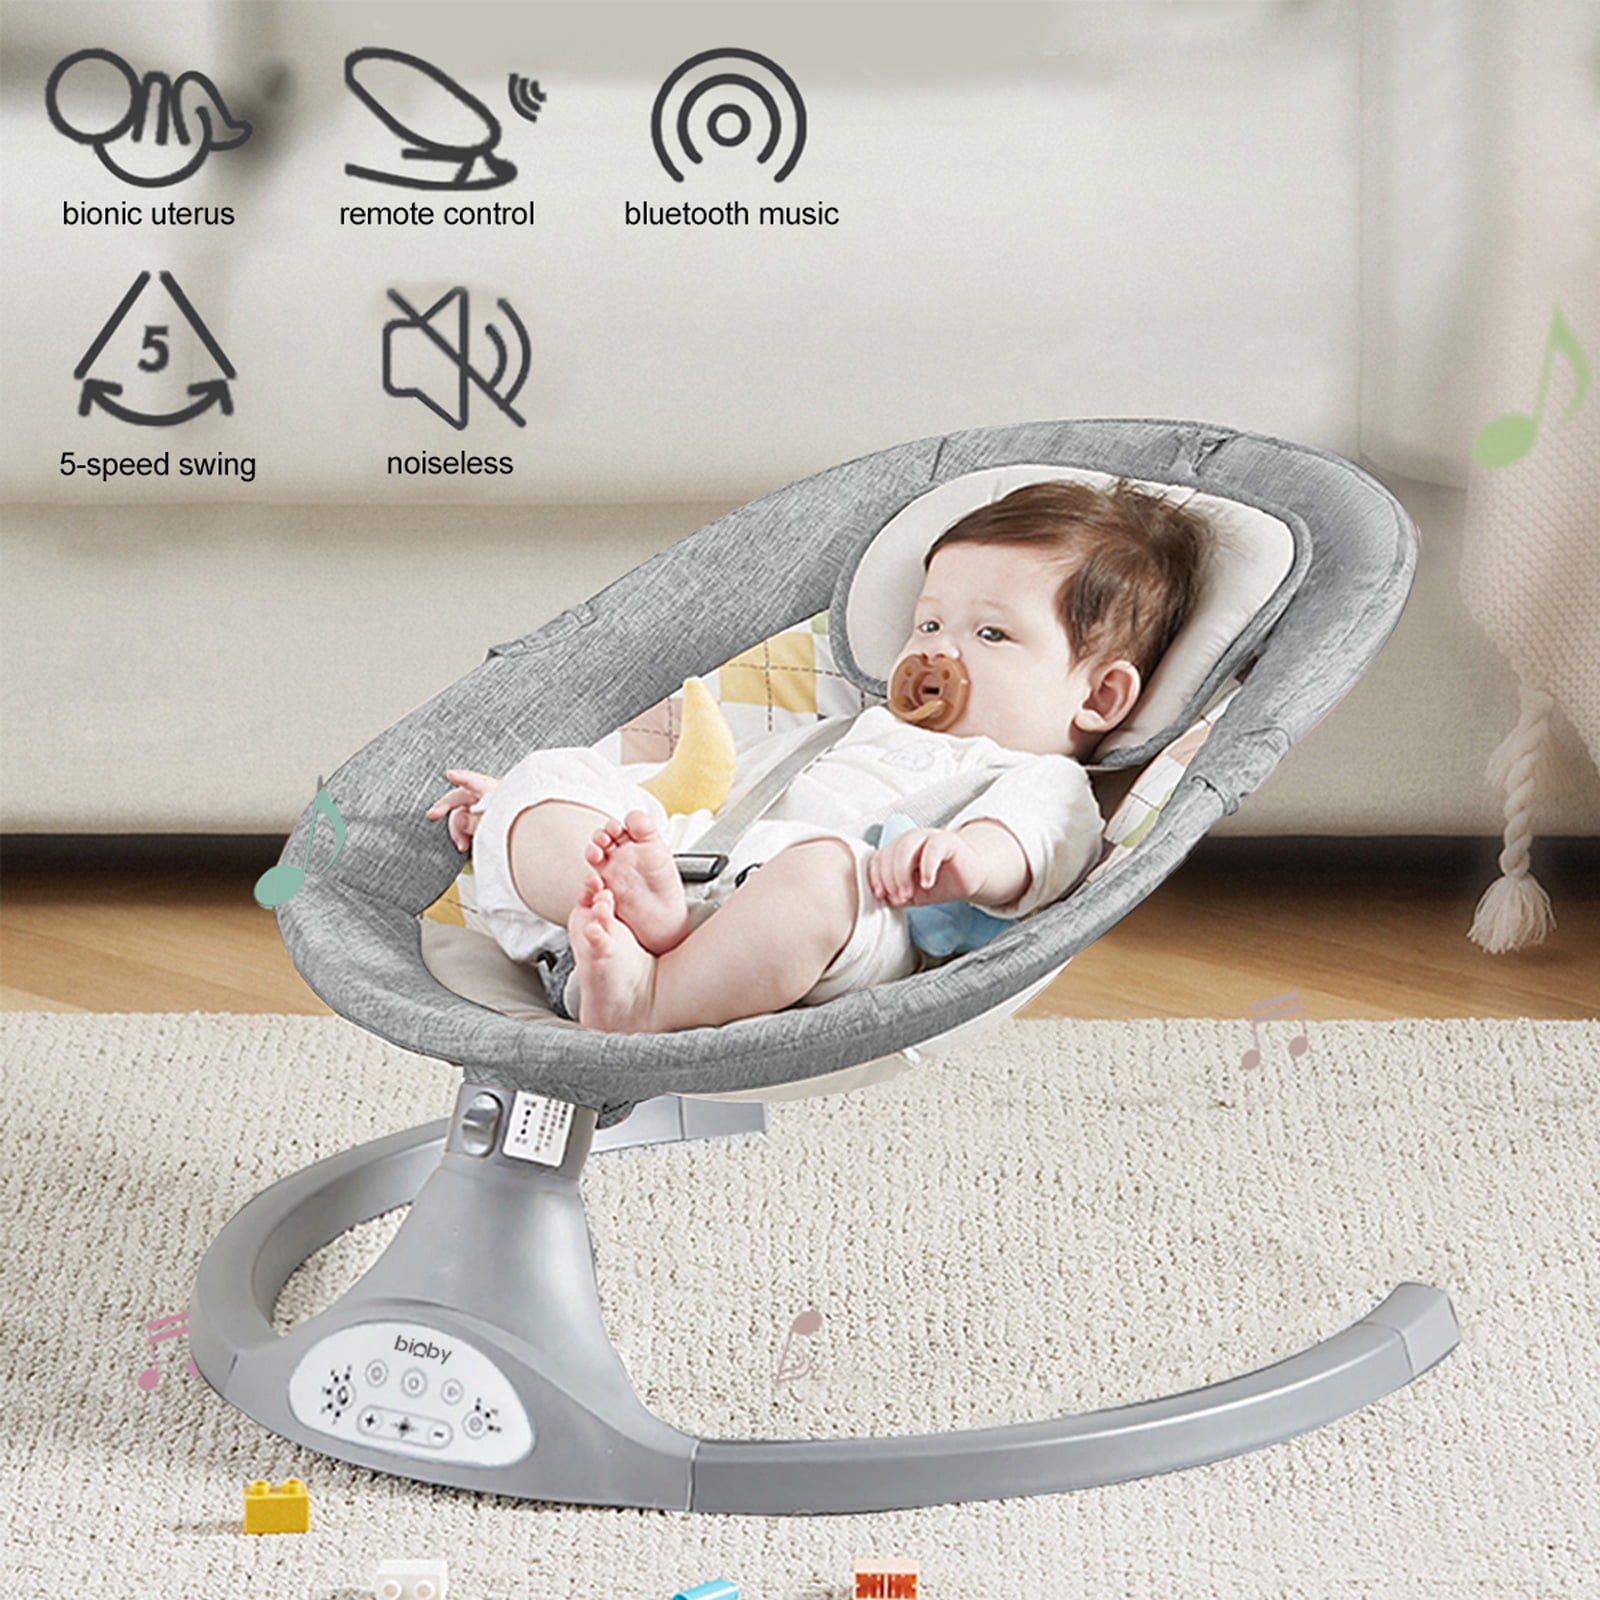 Bluetooth Music Speakers with 10 Preset Lullabies Mosquito Net INFANS Baby Swing for Infants Smart Touch Panel Gray Portable Timing Newborn Rocker with 5 Speed Natural Sway Remote Control 